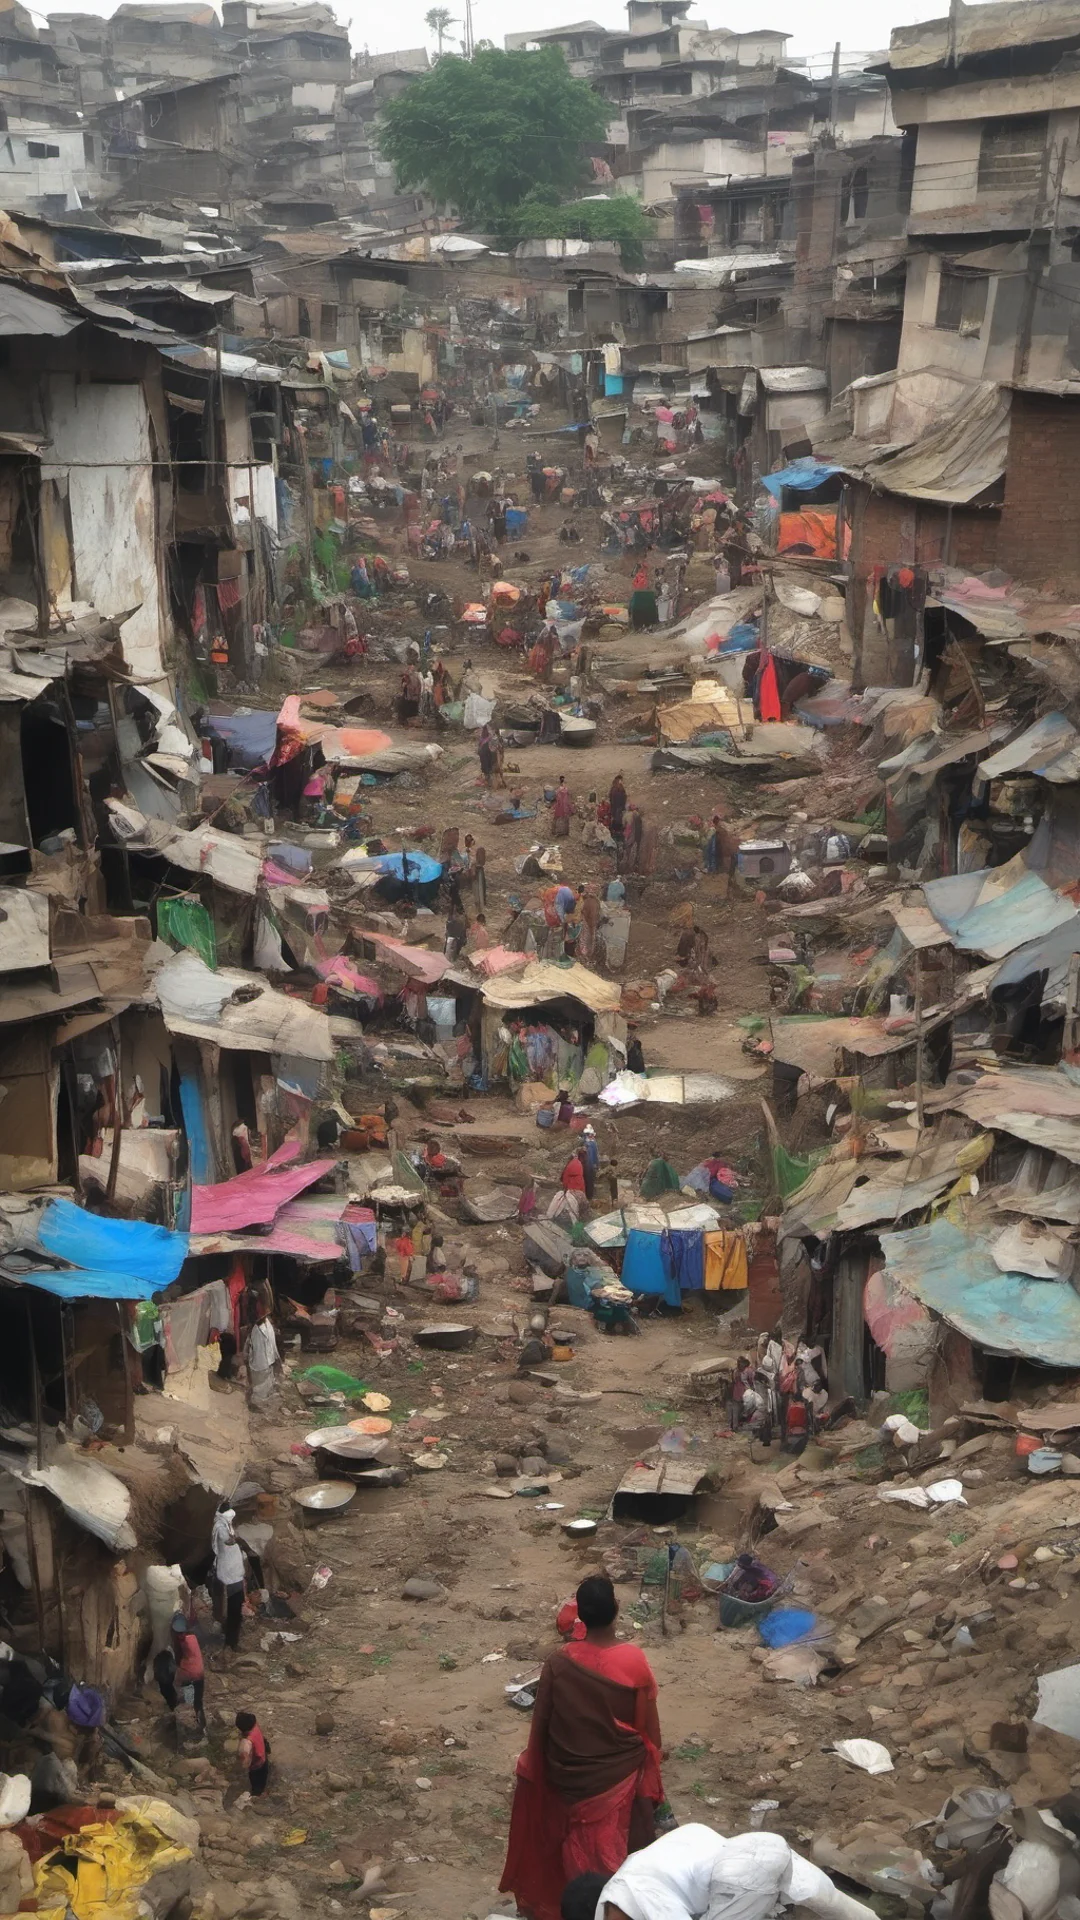 home slums dheli people all around chaos muck poor community colorful tall